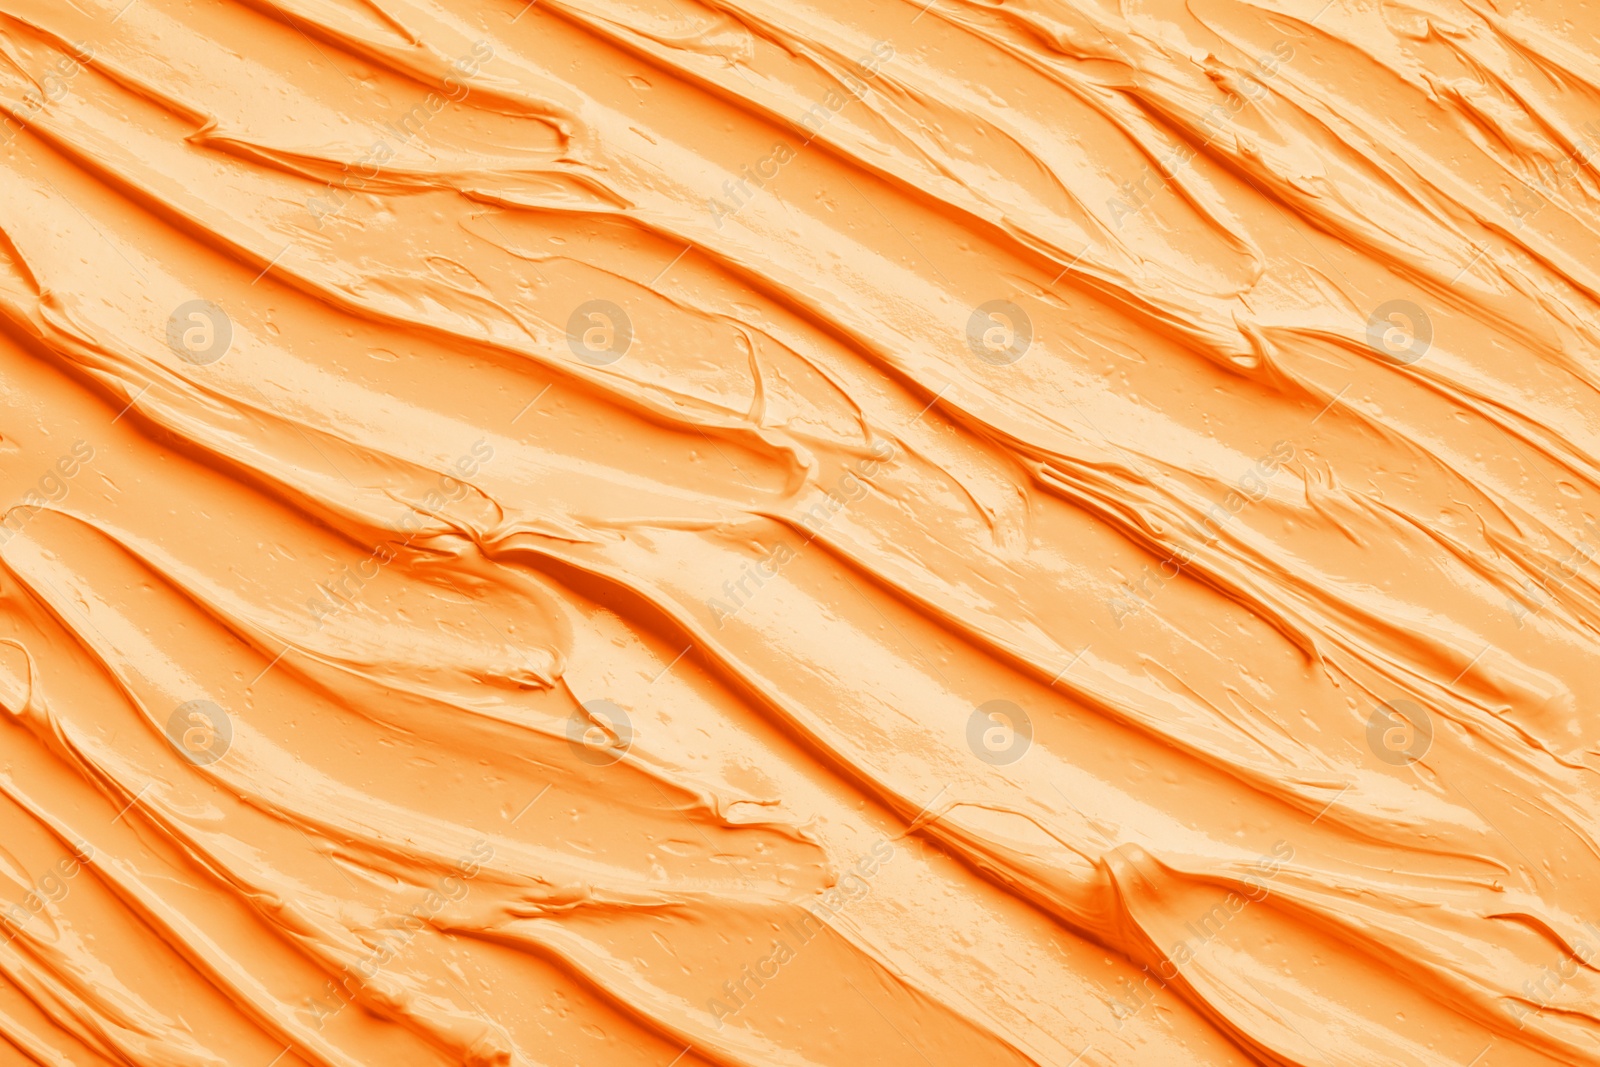 Image of Strokes of pale orange oil paint as background, closeup